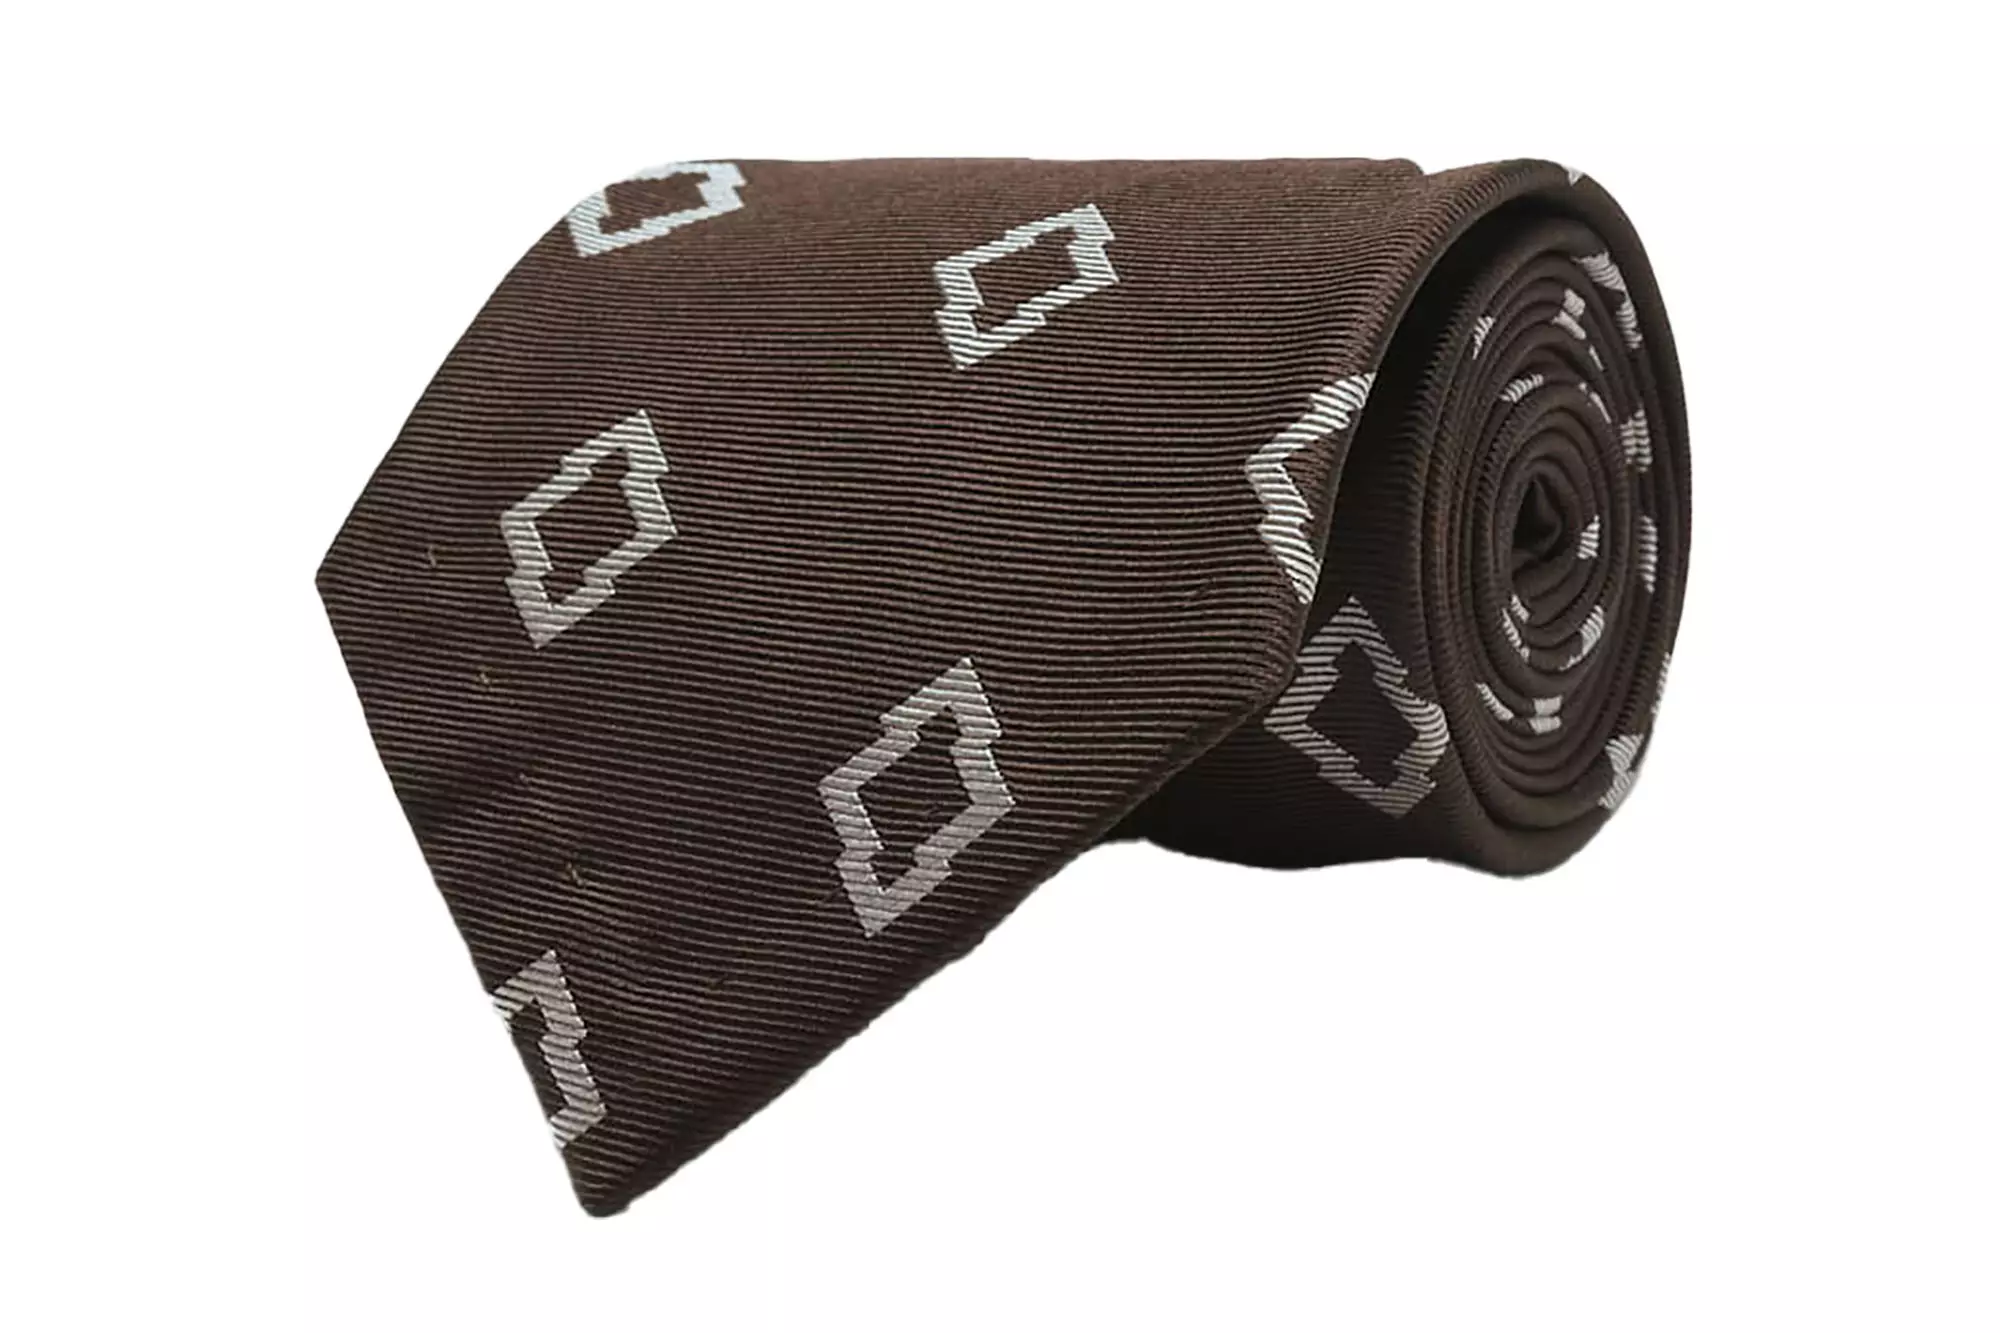 Suitsupply Brown Graphic Tie